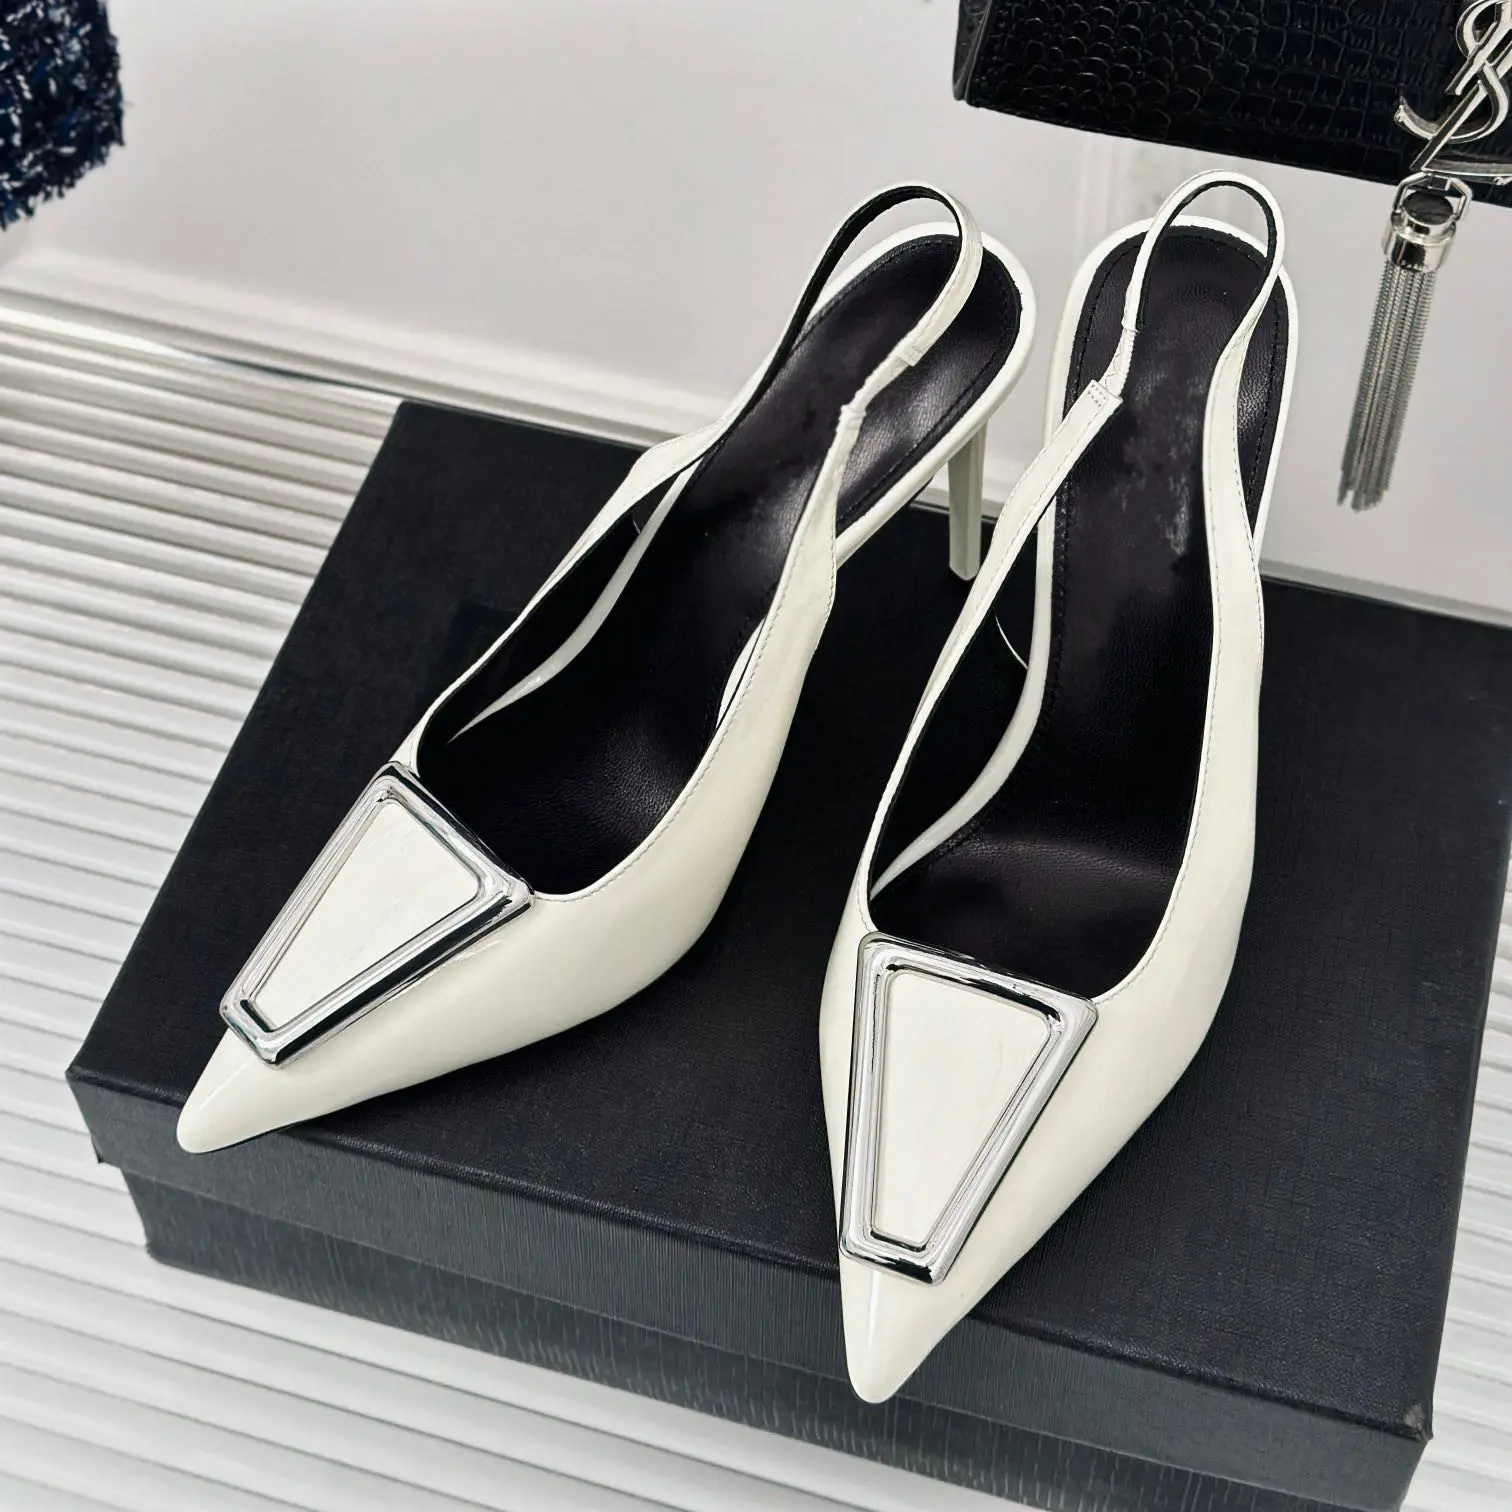 Casual Designer Fashion Women Shoes Sexy Lady White Patent Leather Strappy Pointy Toe High Heels Sandals Zapatos Mujer Sandals 2020 fashion women summer patent leather sandals sexy peep toe cut out high heels flip flops female party shoes woman